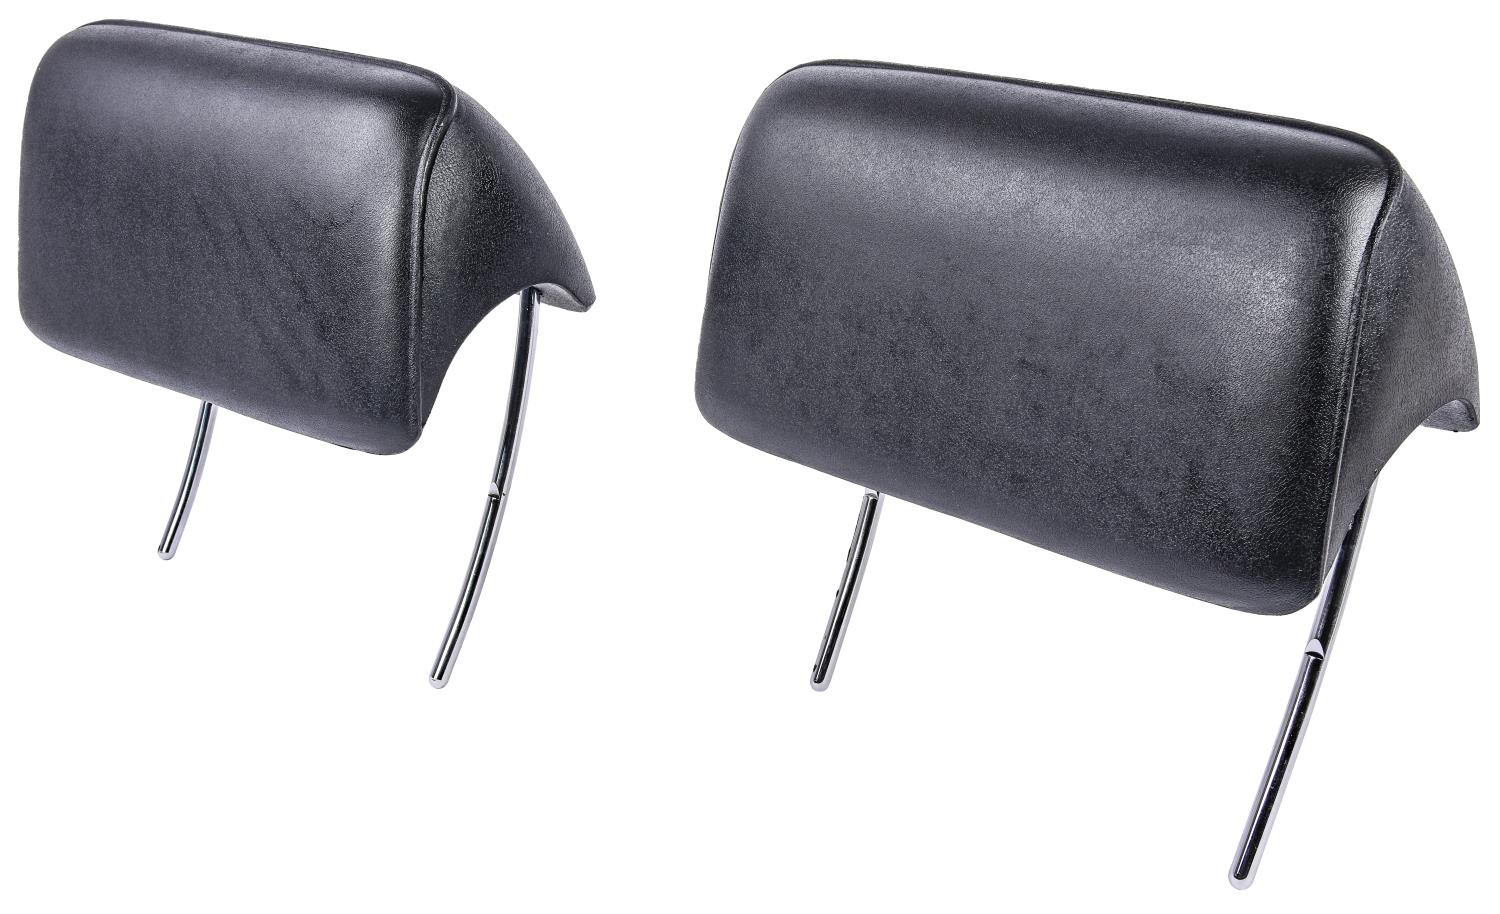 Bucket Seat Headrests Fit Select 1966-1967 Buick, Chevy, Oldsmobile Pontiac Models [Black, Pair]